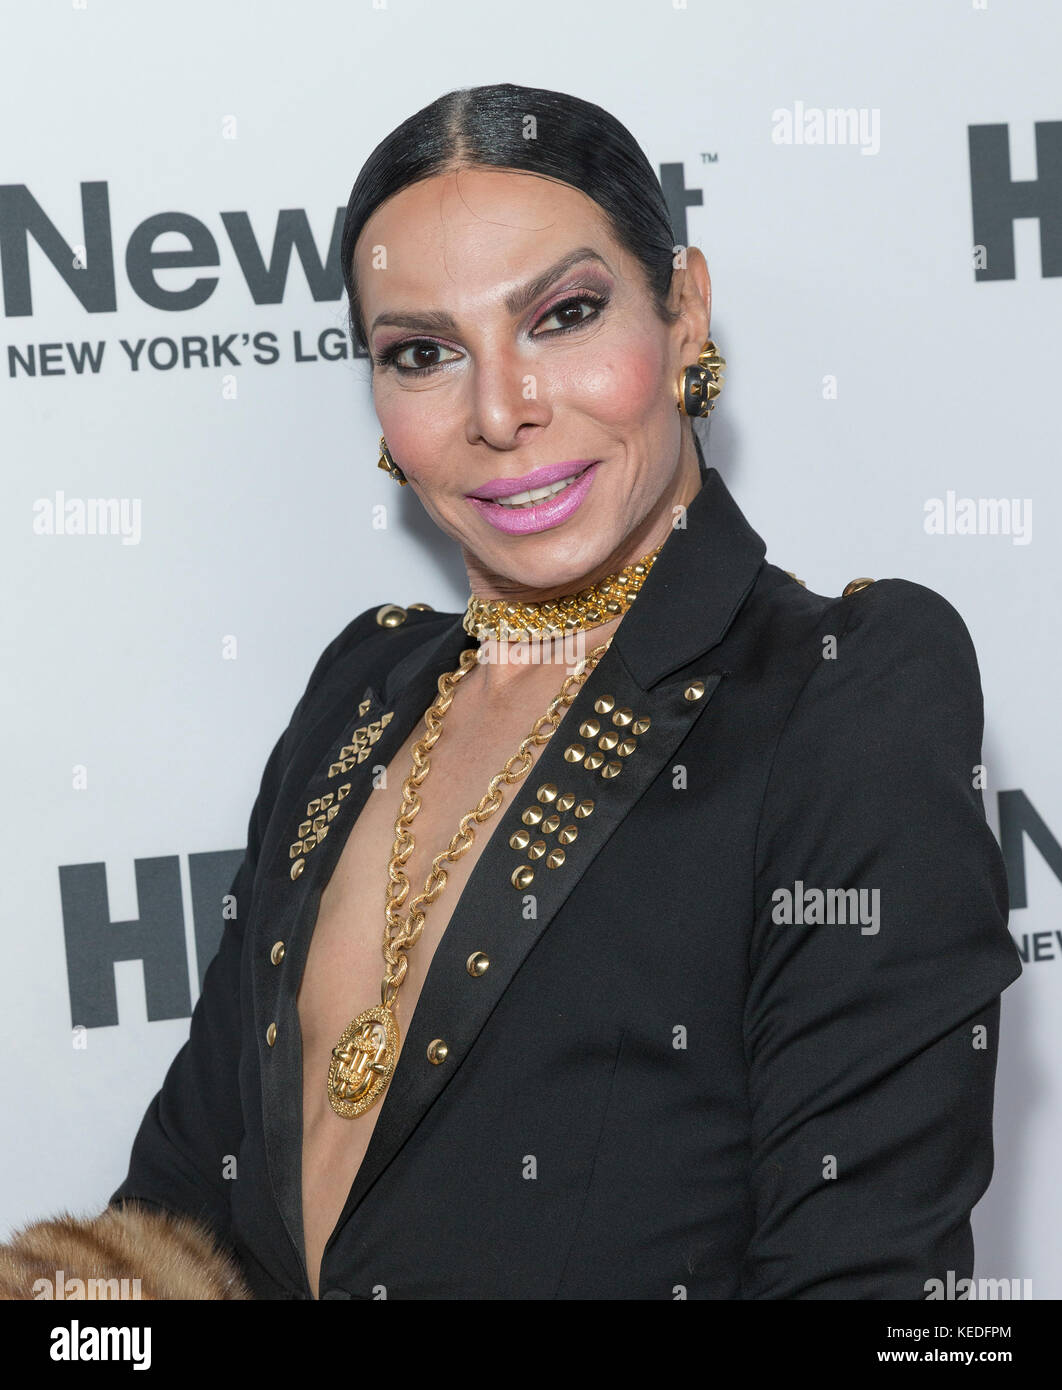 New York, United States. 19th Oct, 2017. Jose Castelo Branco attends Susanne Bartsch: On Top premiere at NewFest at SVA theater Credit: Lev Radin/Pacific Press/Alamy Live News Stock Photo